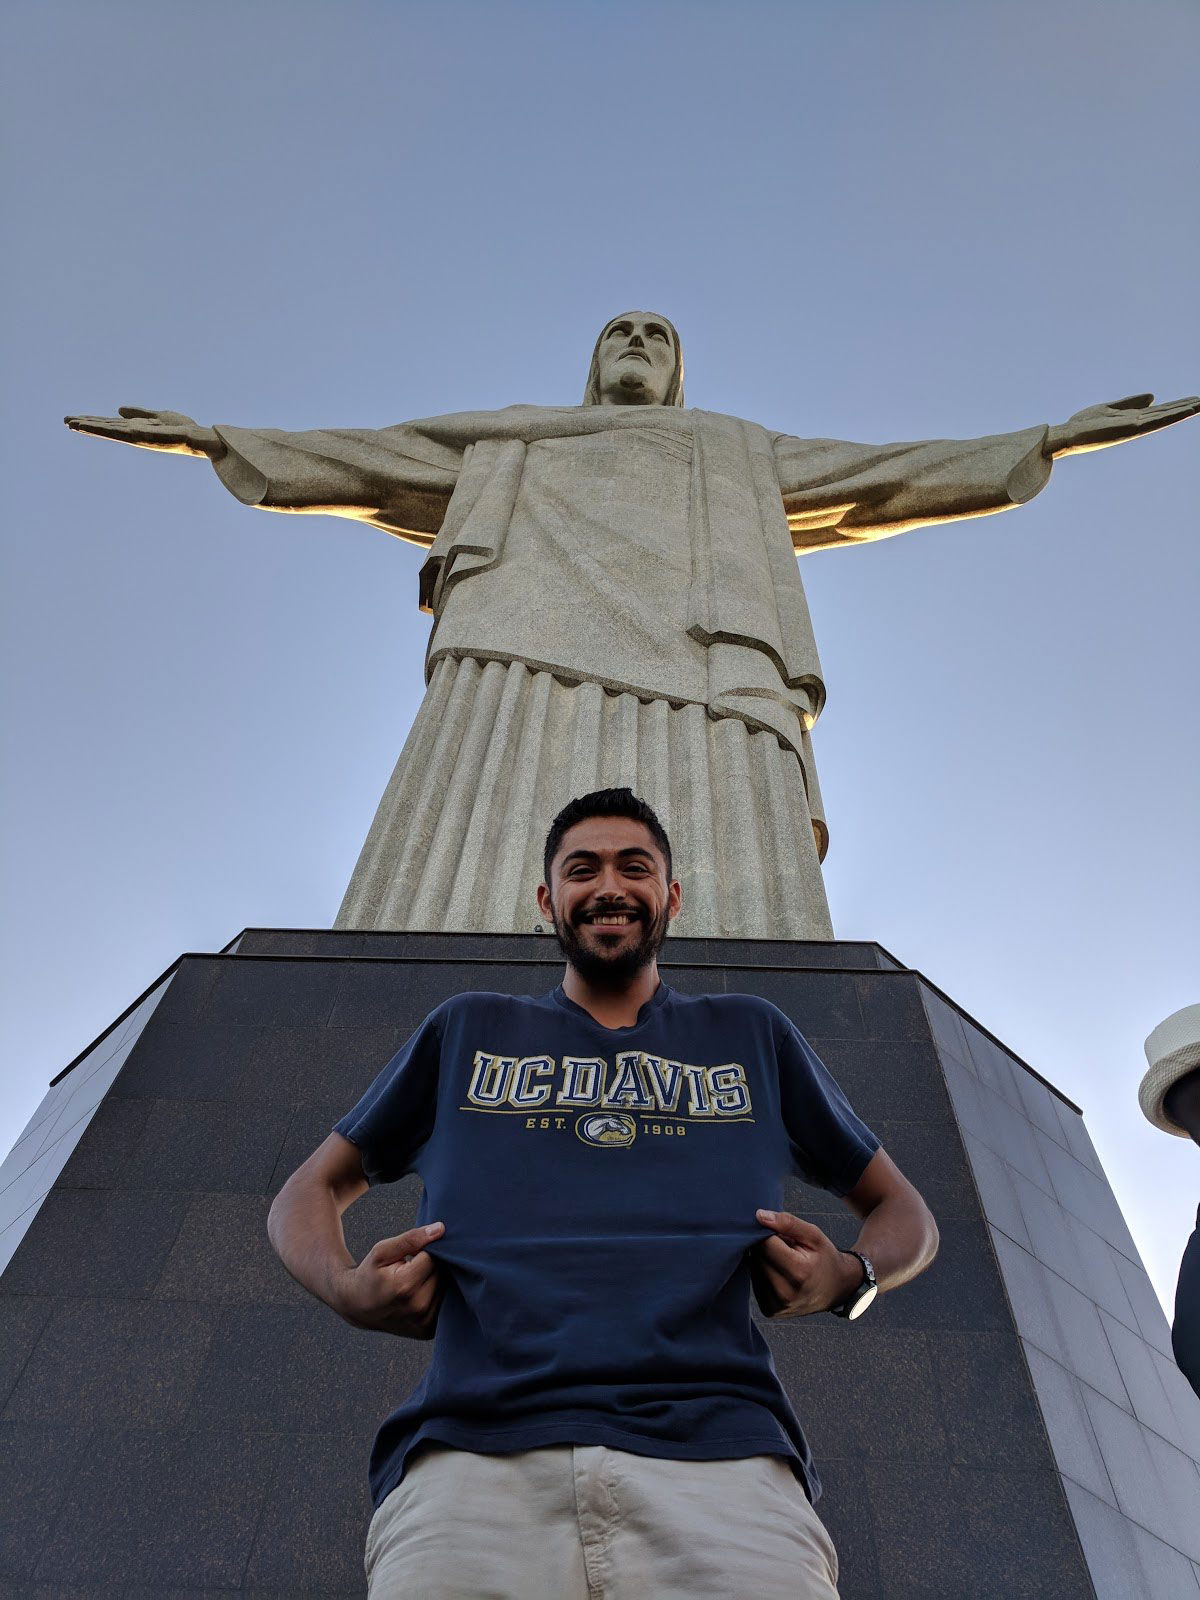 Ricardo standing in from of the Christ the Redeemer statue